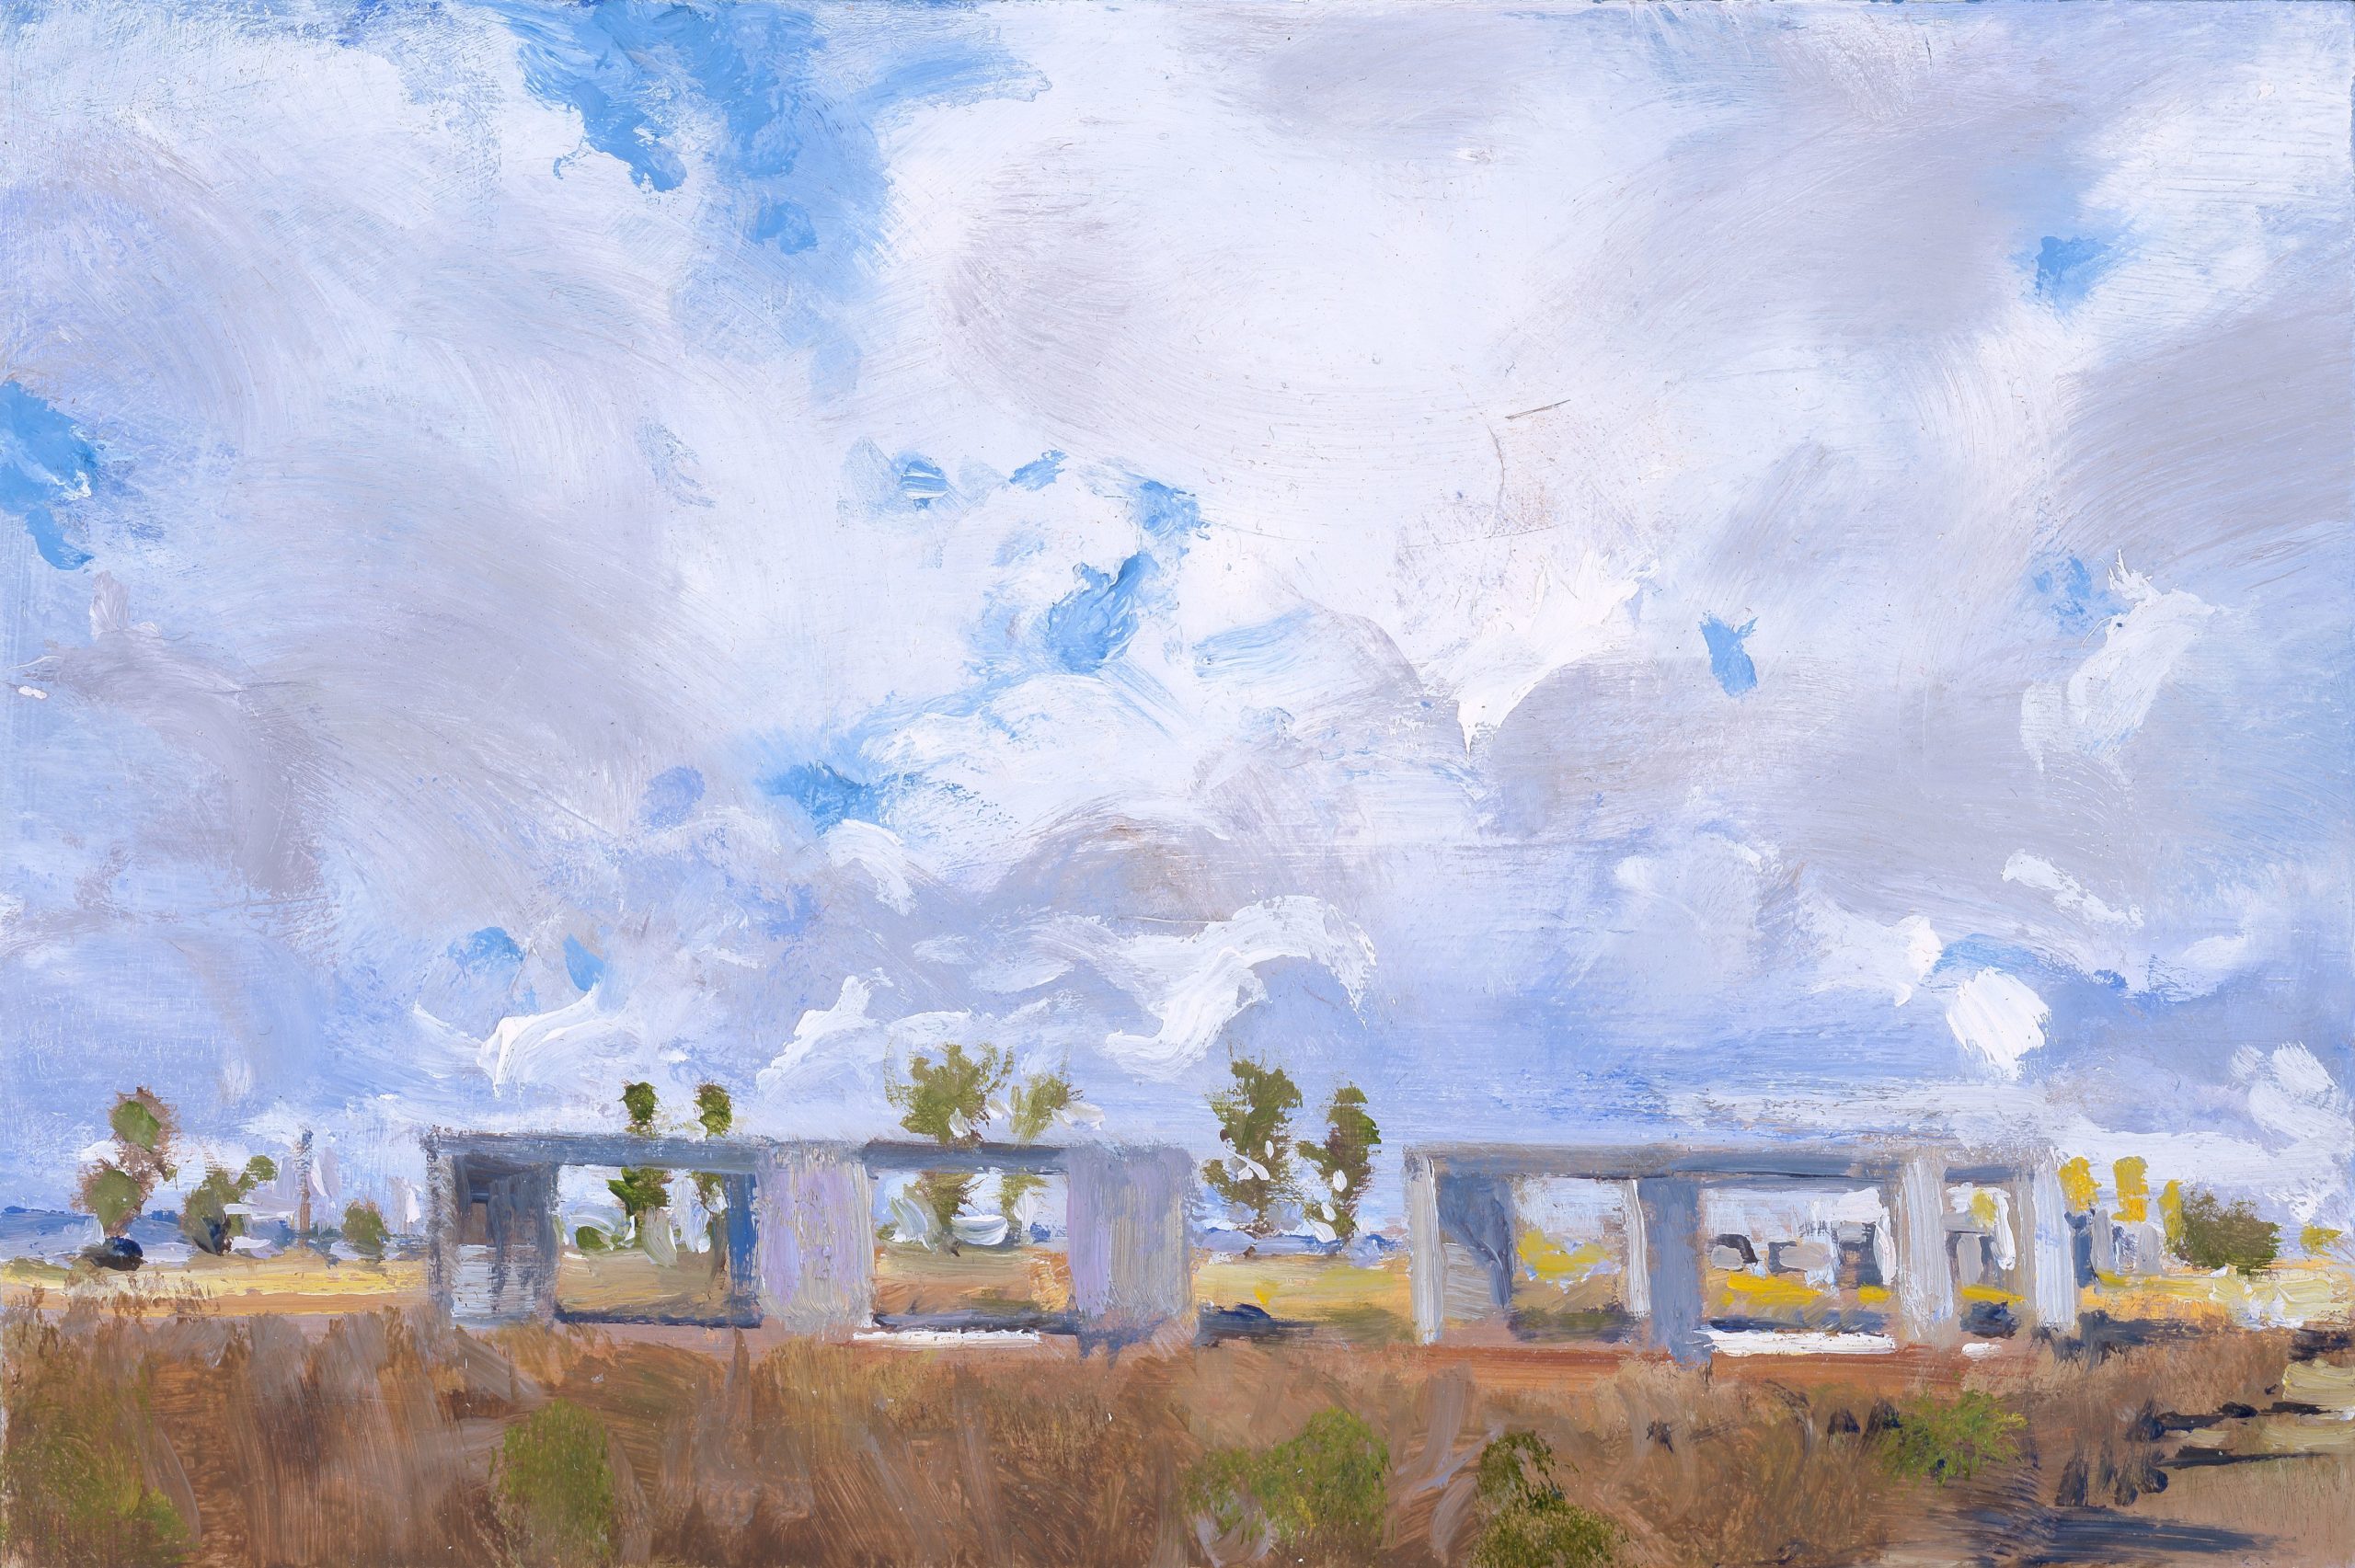 

											Don Stinson</b>

											<em>
												Beyond the Romantic</em> 

											<h4>
												Santa Fe: September 9 – November 26, 2022											</h4>

		                																																													<i>Donald Judd under John Constable Clouds in West Texas Skies, 2005,</i>  
																																								2022, 
																																								oil on copper, 
																																								4 x 6 inches 
																								
		                				